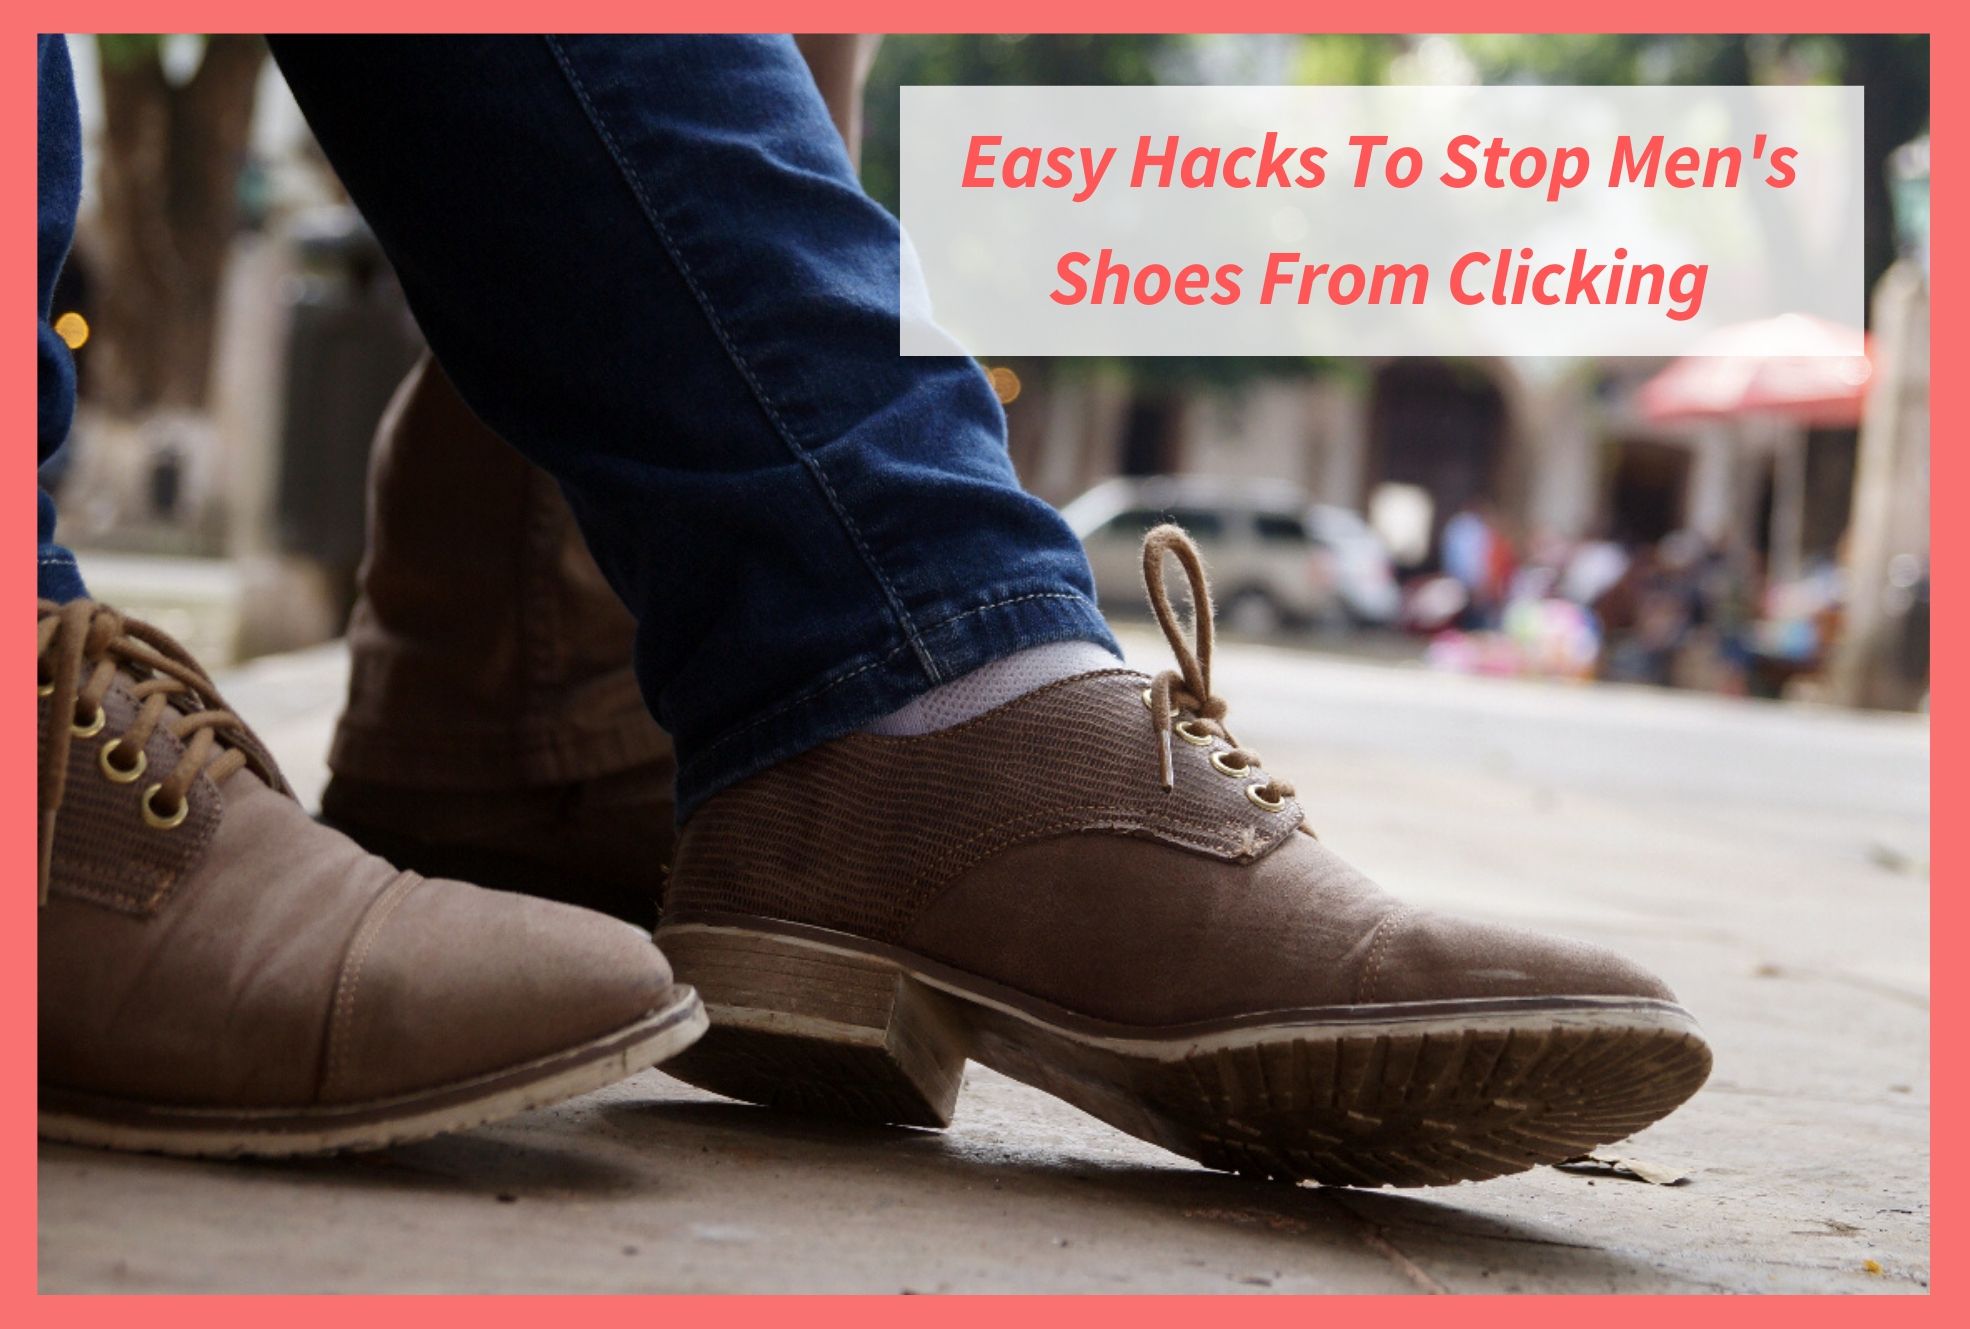 Use These Easy Hacks To Stop Your Shoes From Clicking - The Shoestopper